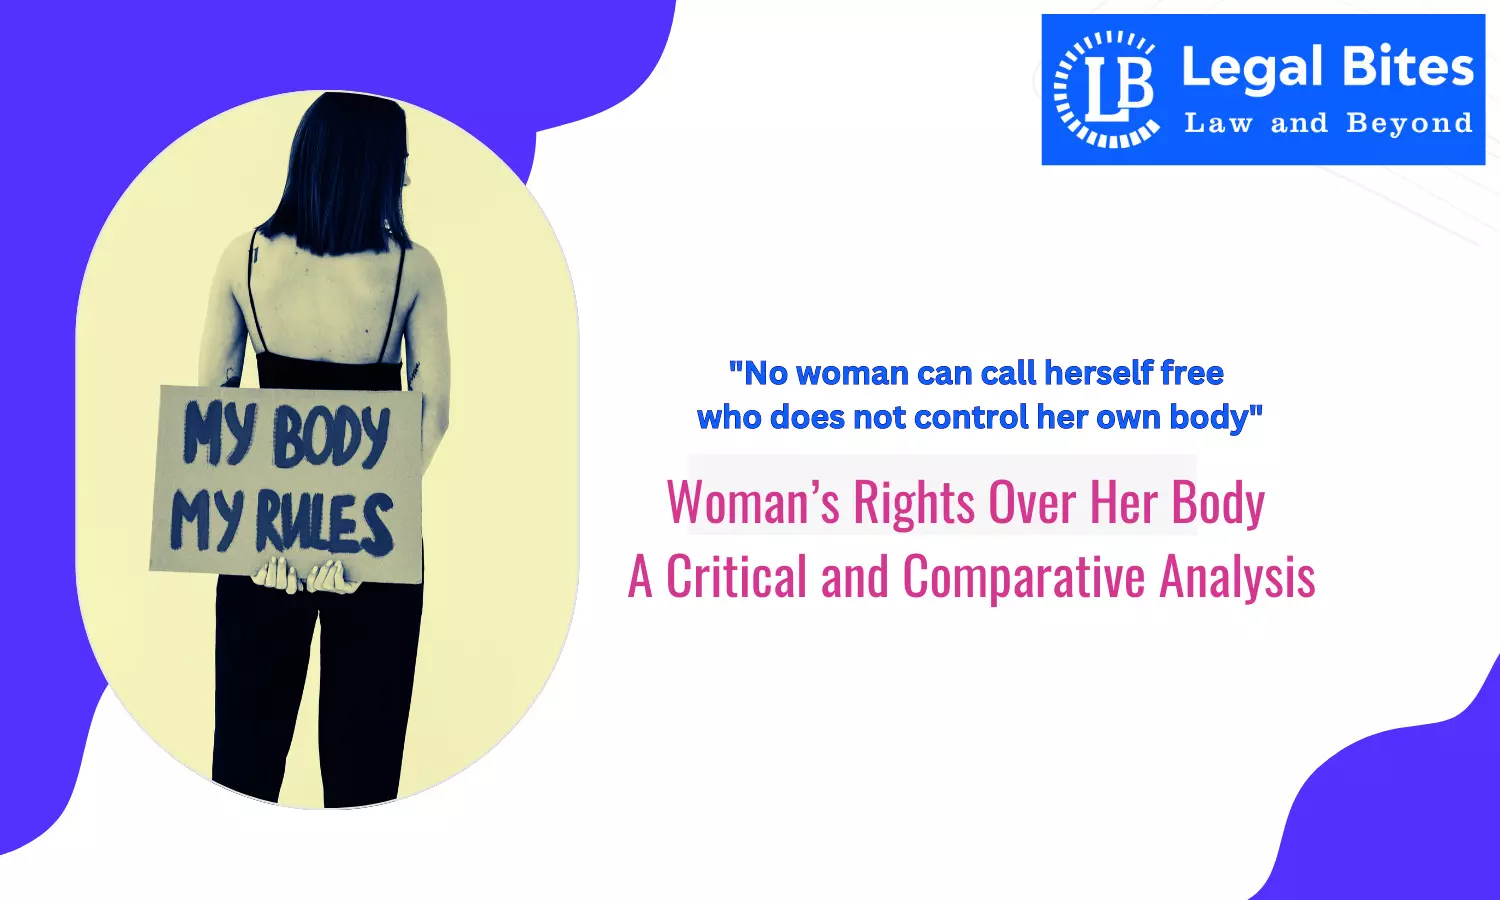 Woman’s Rights Over Her Body- A Critical and Comparative Analysis